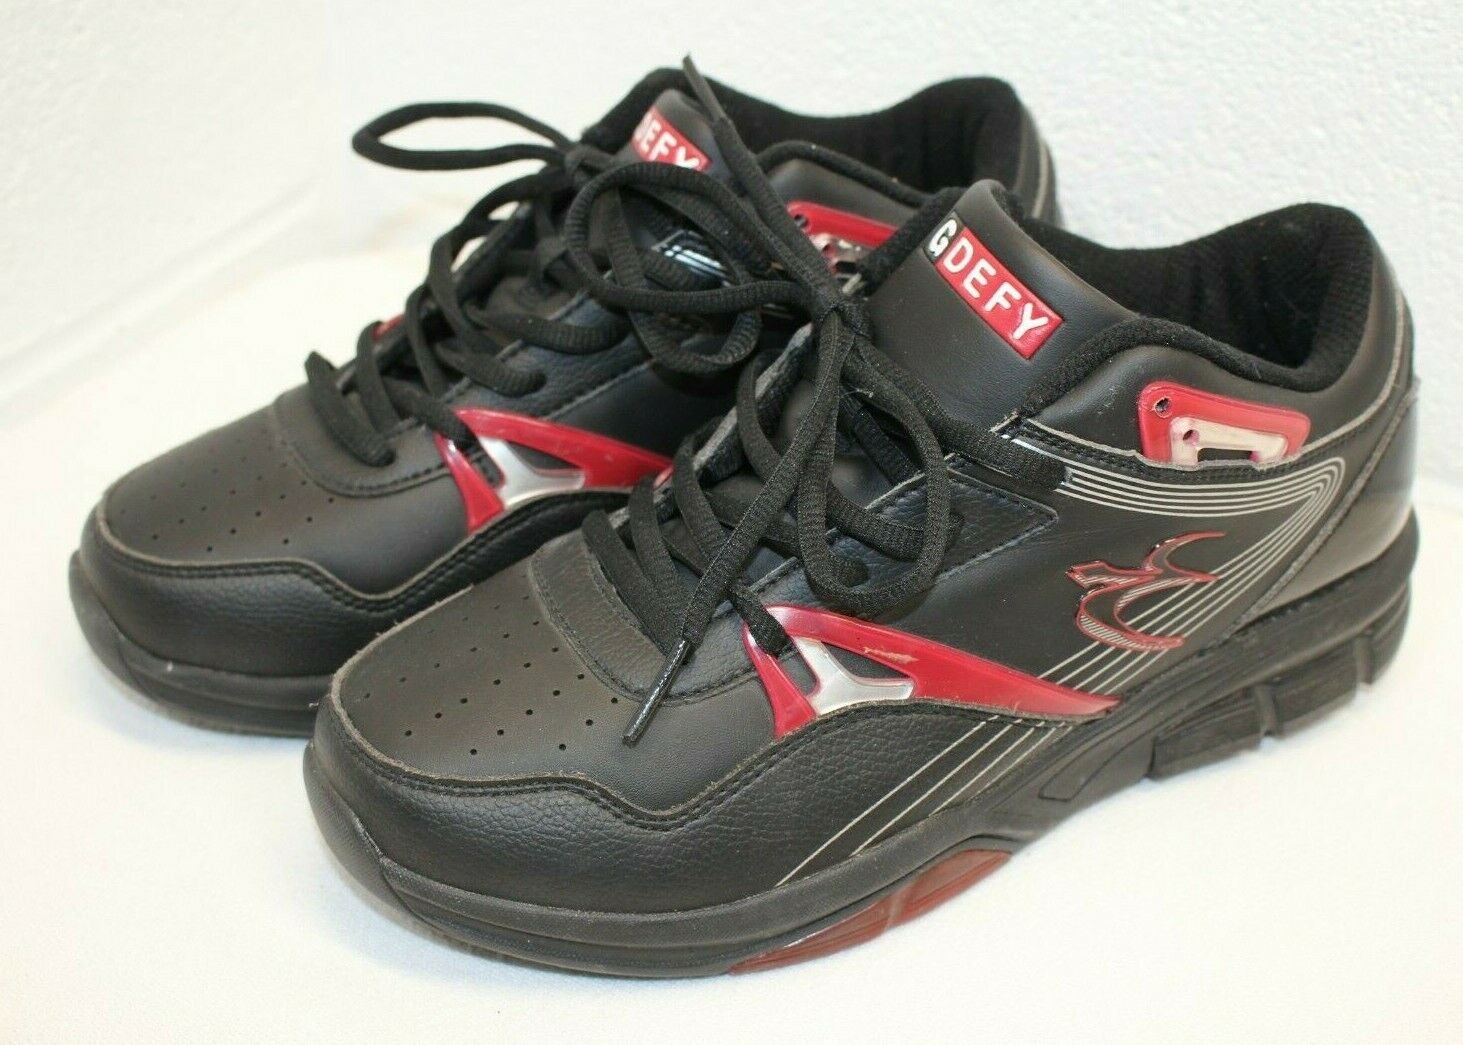 G-Defy XLR8 III Black Athletic Shoes Pain Relief Corrective Fit Men’s 8.5 WIDE